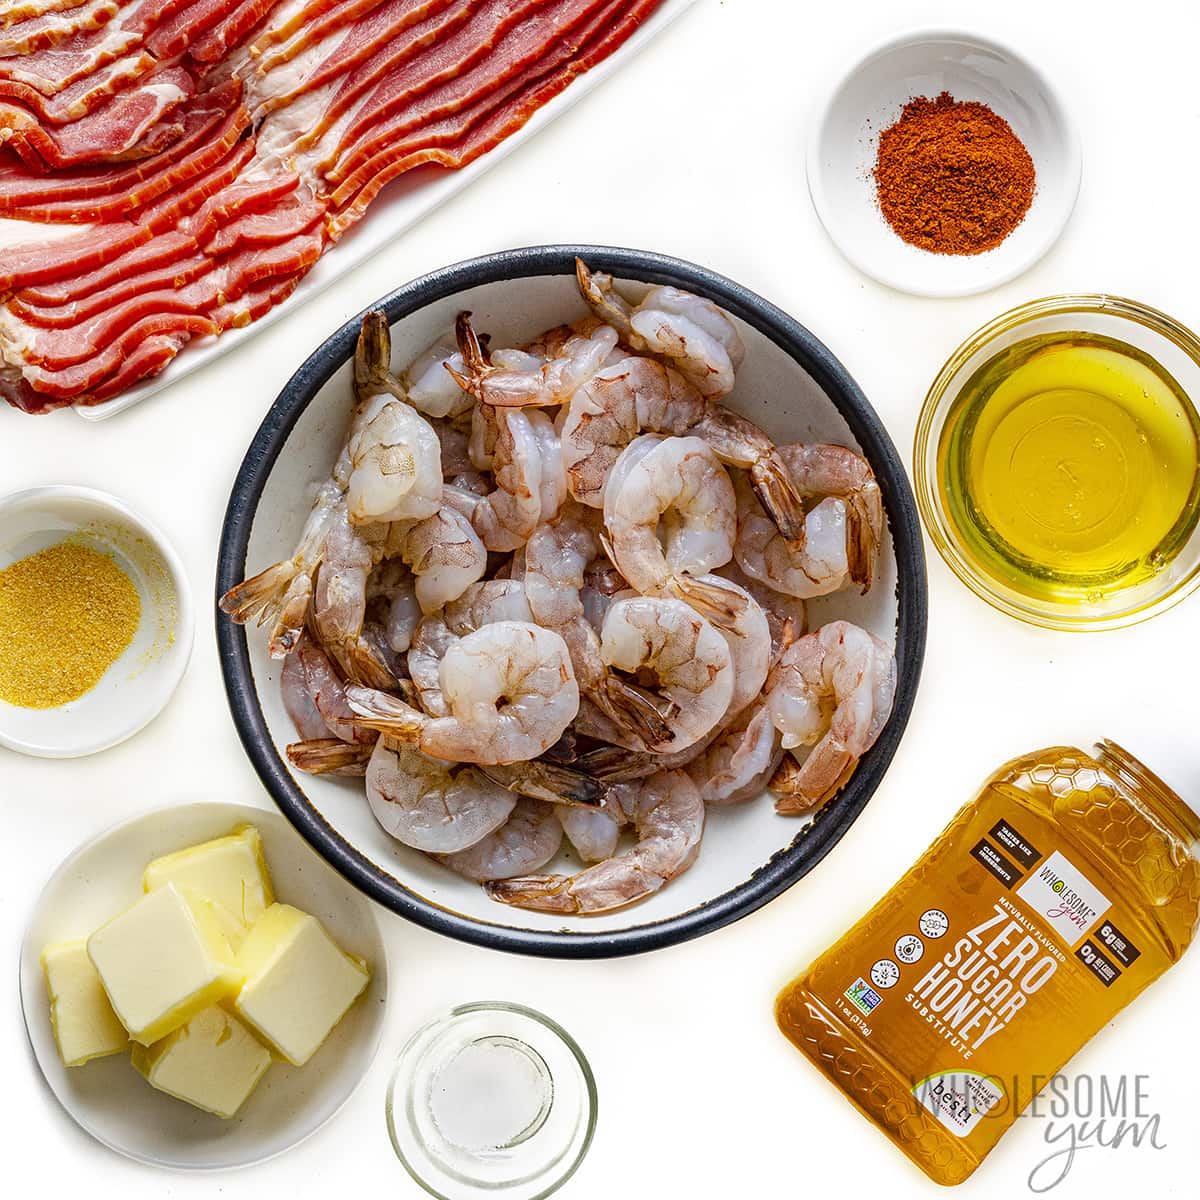 Bacon wrapped shrimp recipe ingredients.